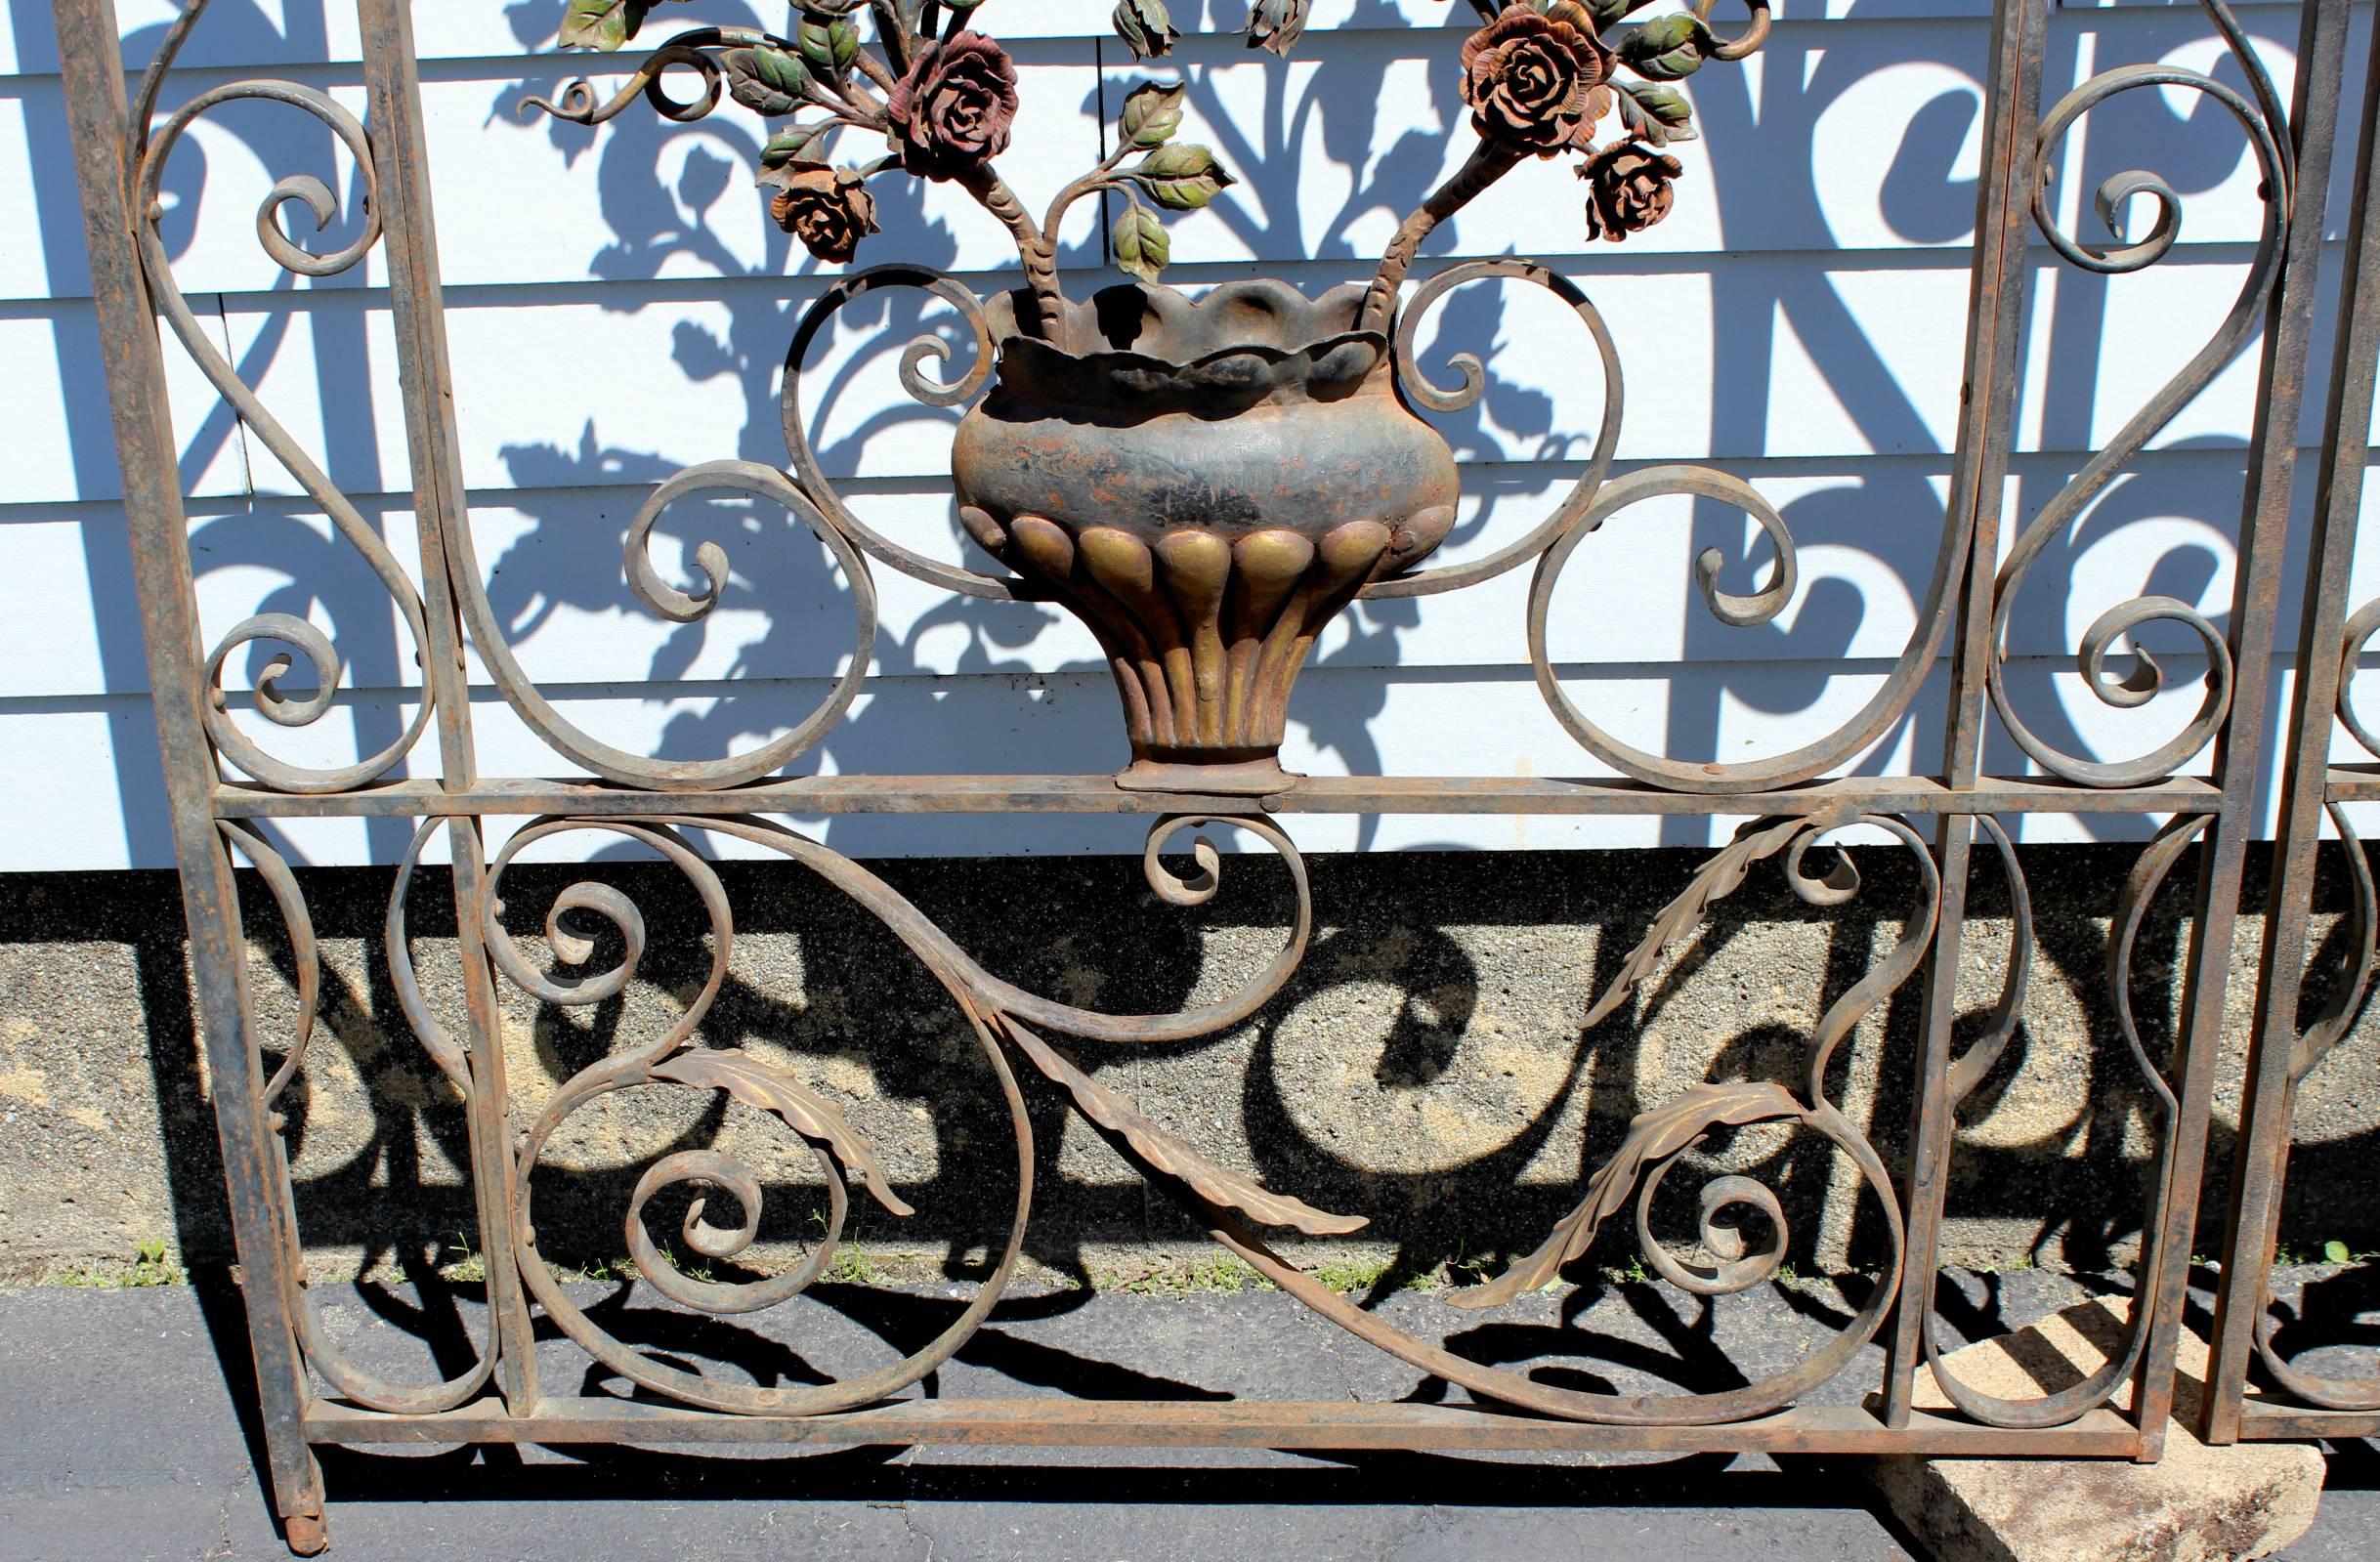 An exceptional pair of polychrome iron garden gates with a center three dimensional urn with spray of roses decoration on each door, surrounded by detailed iron scrollwork. Each door has an attached hinge mount on the upper corner. Very good overall